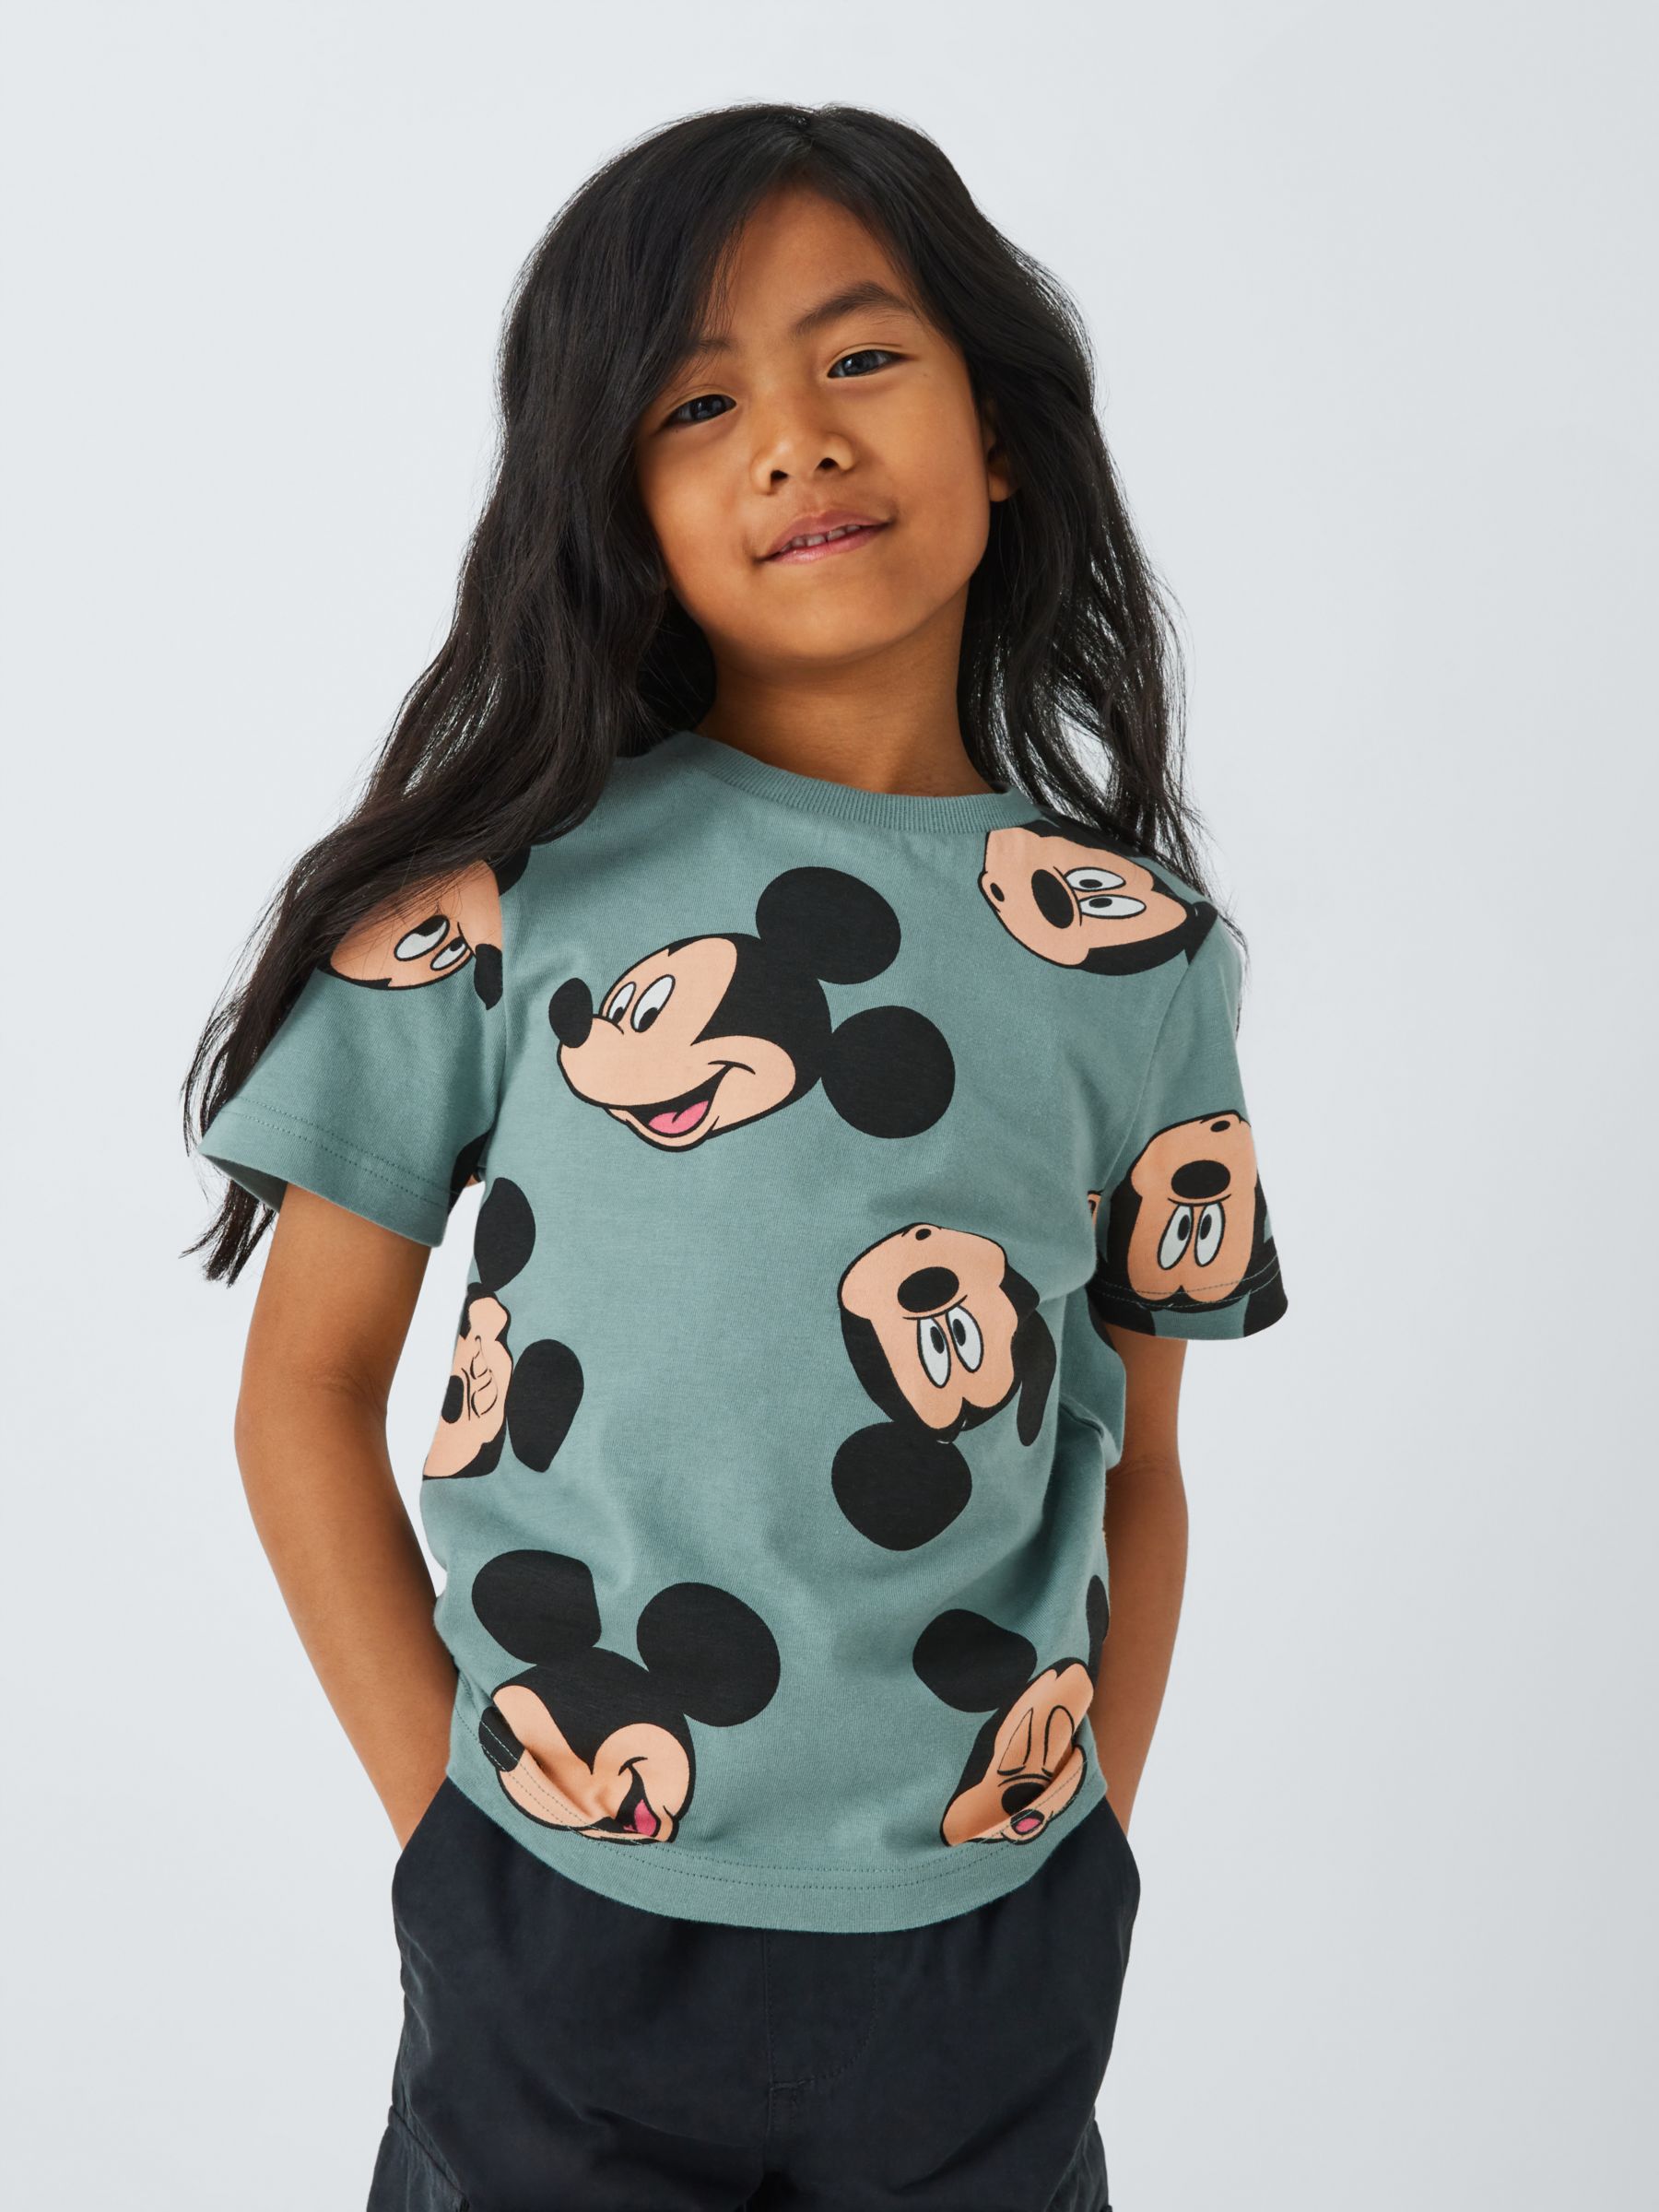 Buy Brand Threads Kids' Disney Mickey Mouse T-Shirt, Green Online at johnlewis.com